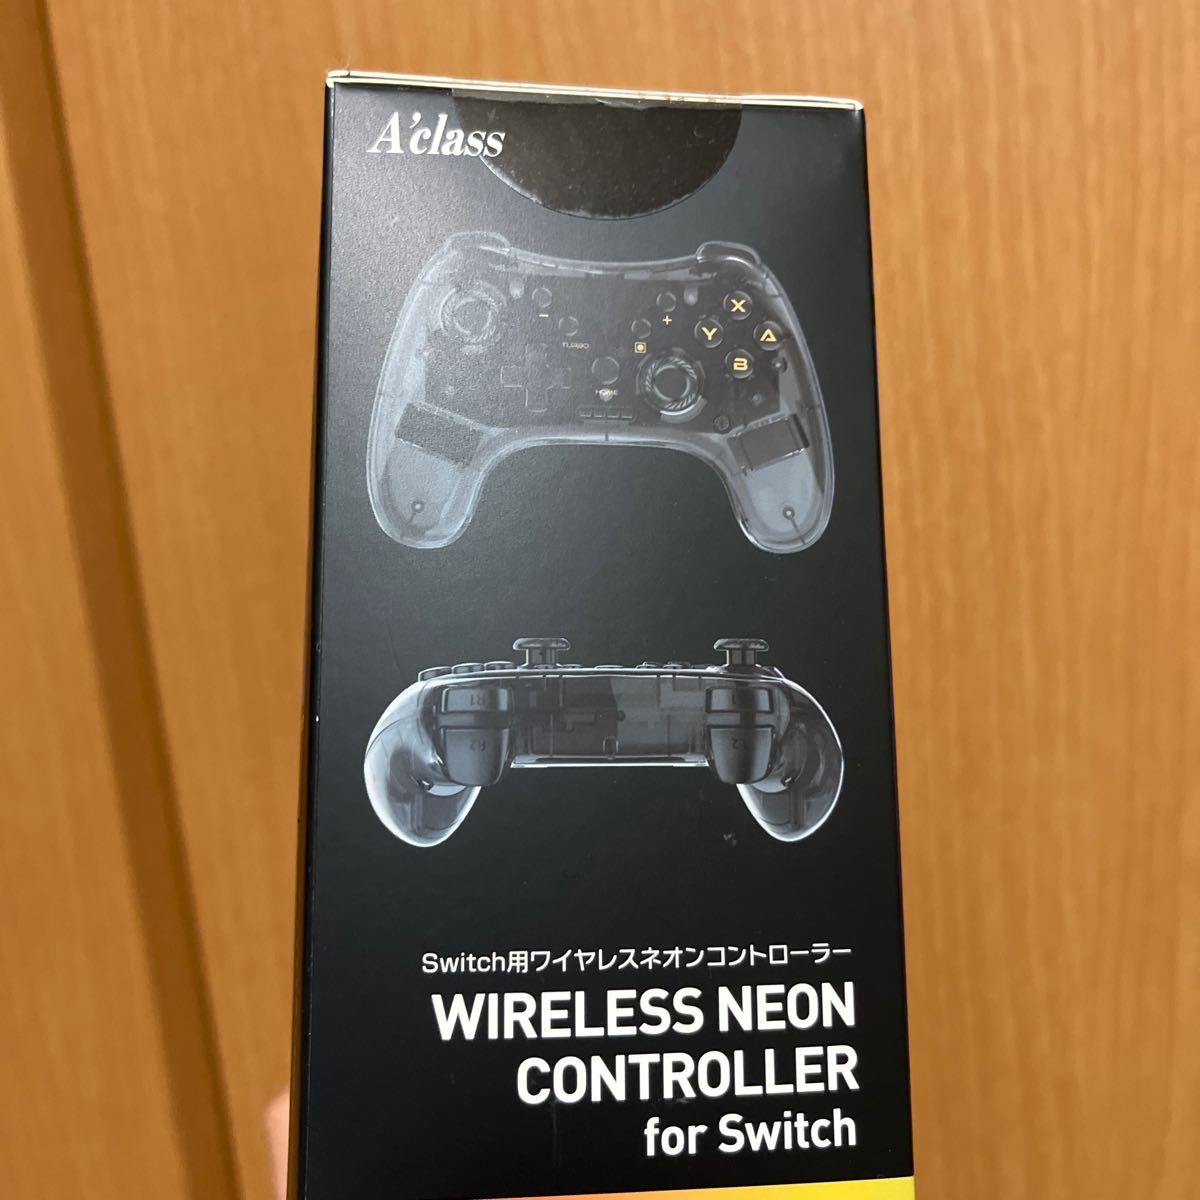 wirelessneon controller for Switch